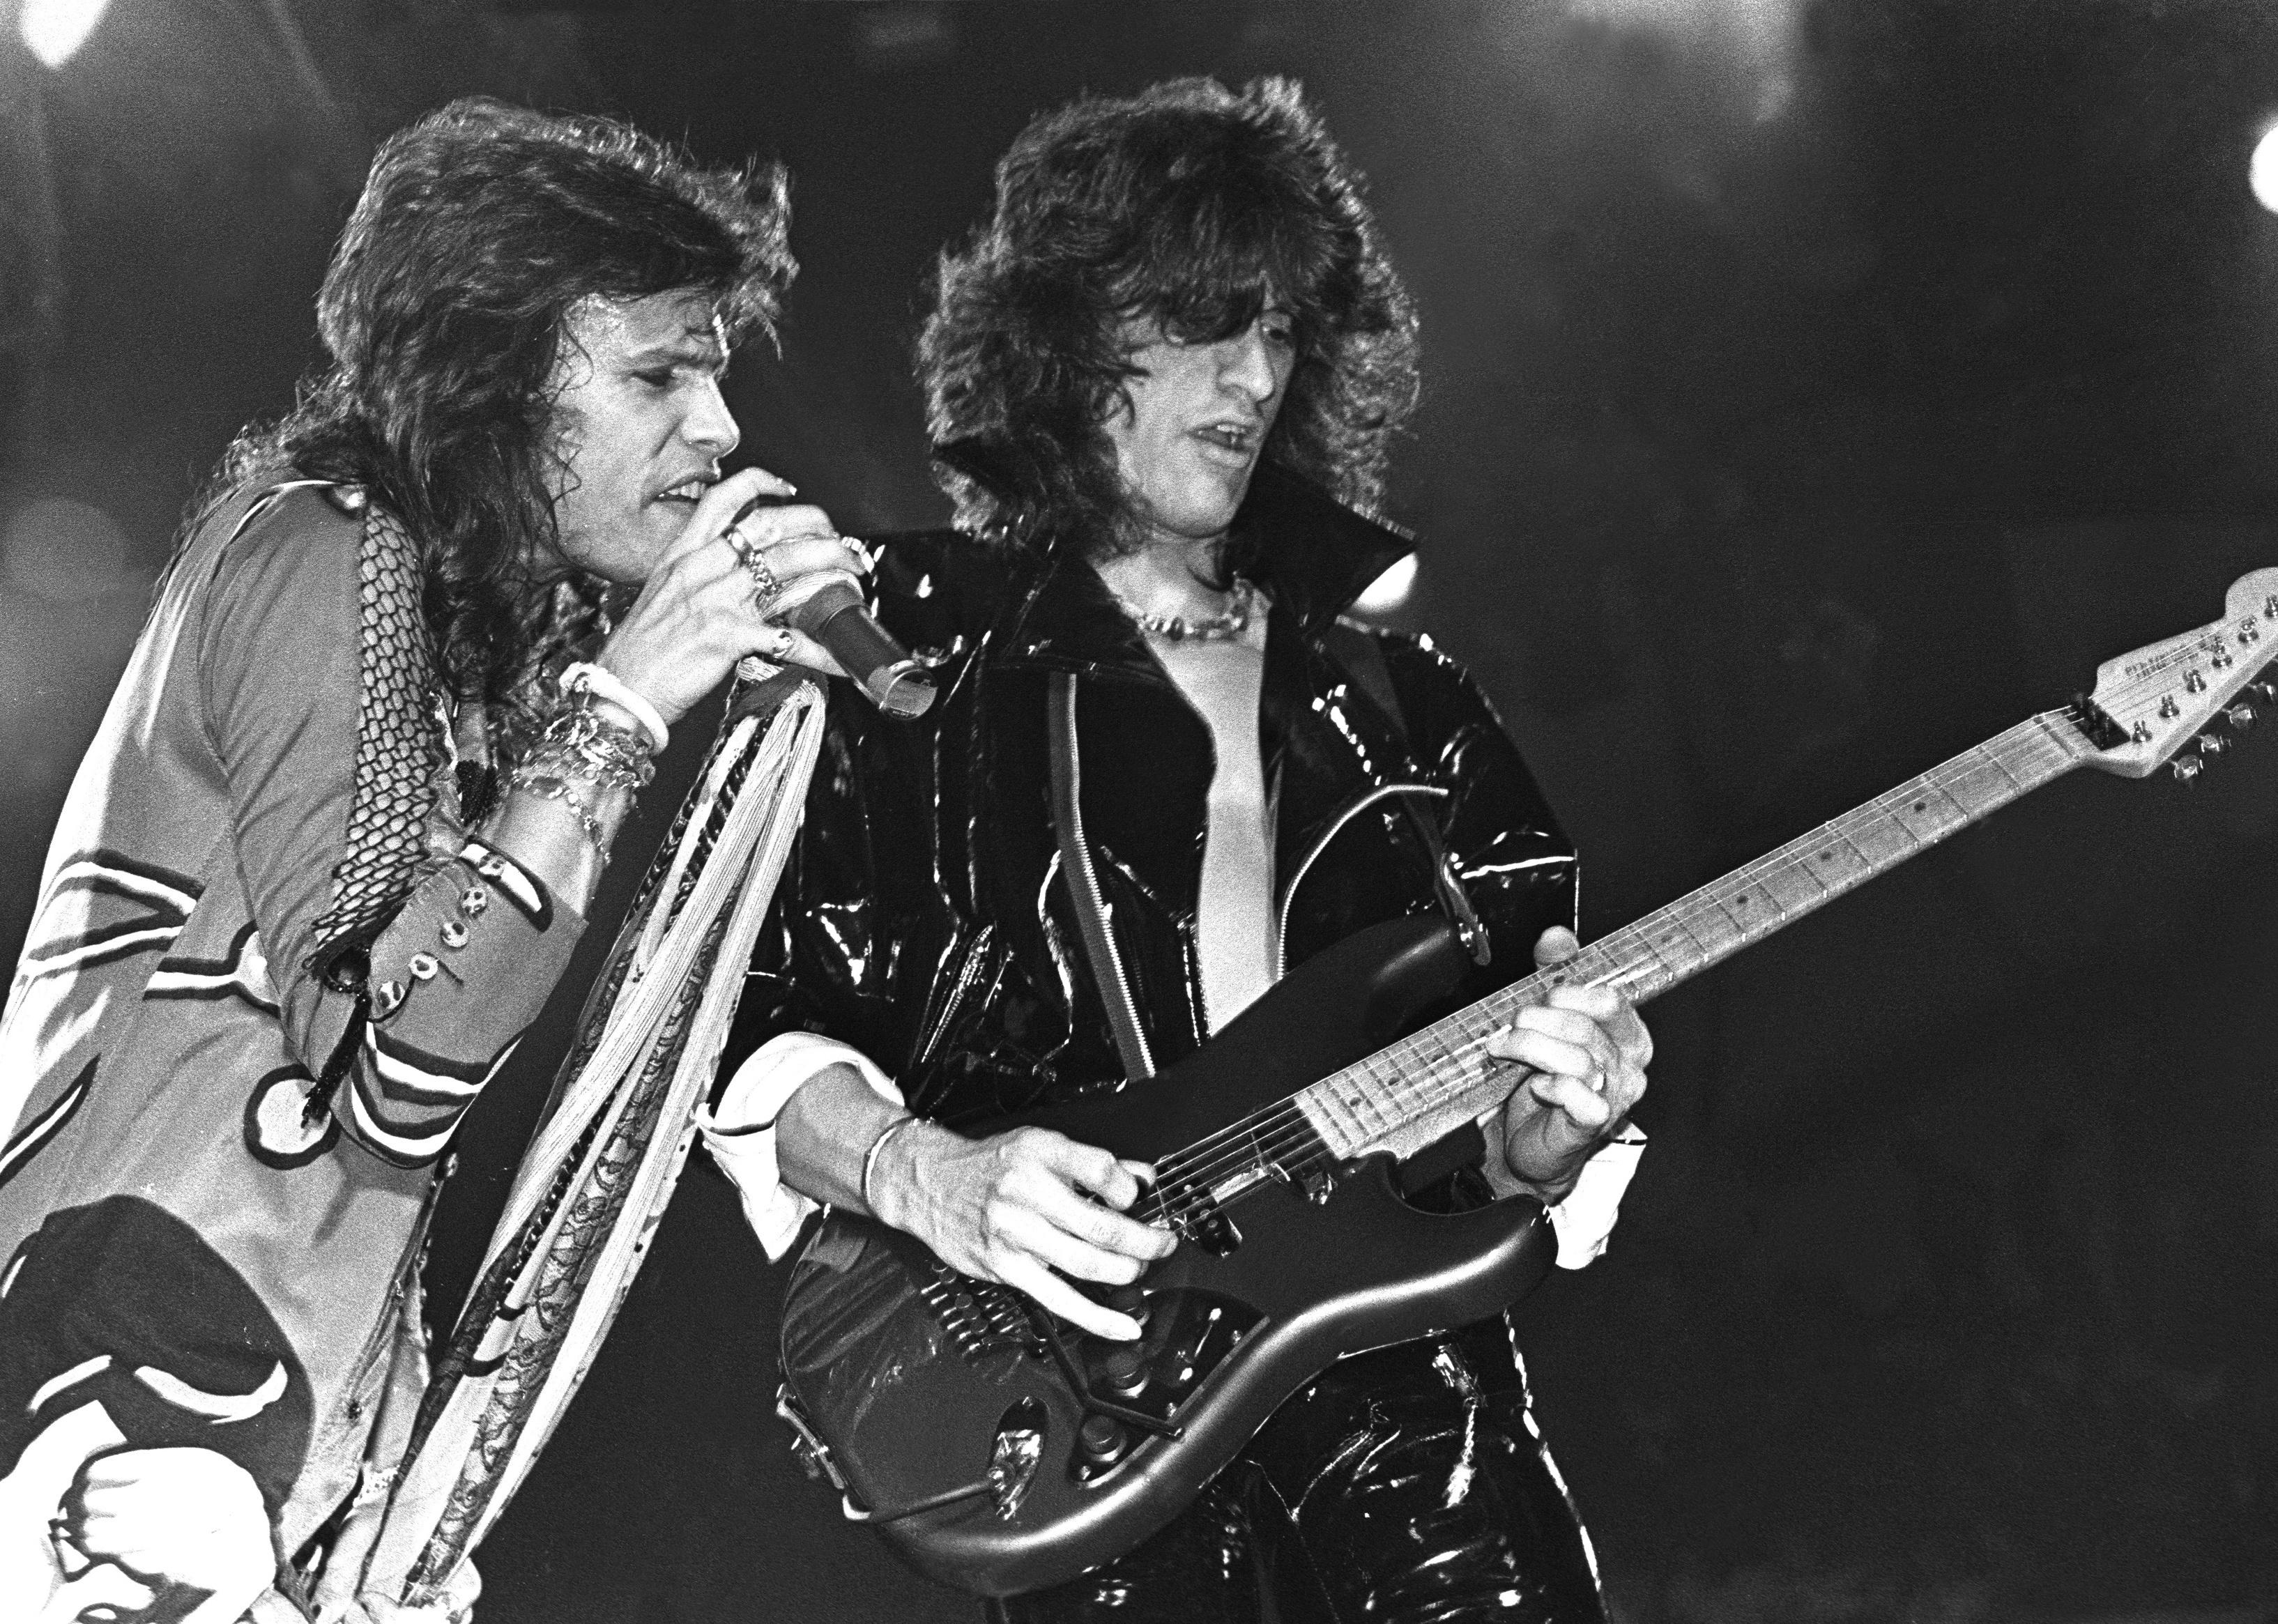 Aerosmith onstage singing and playing guitar